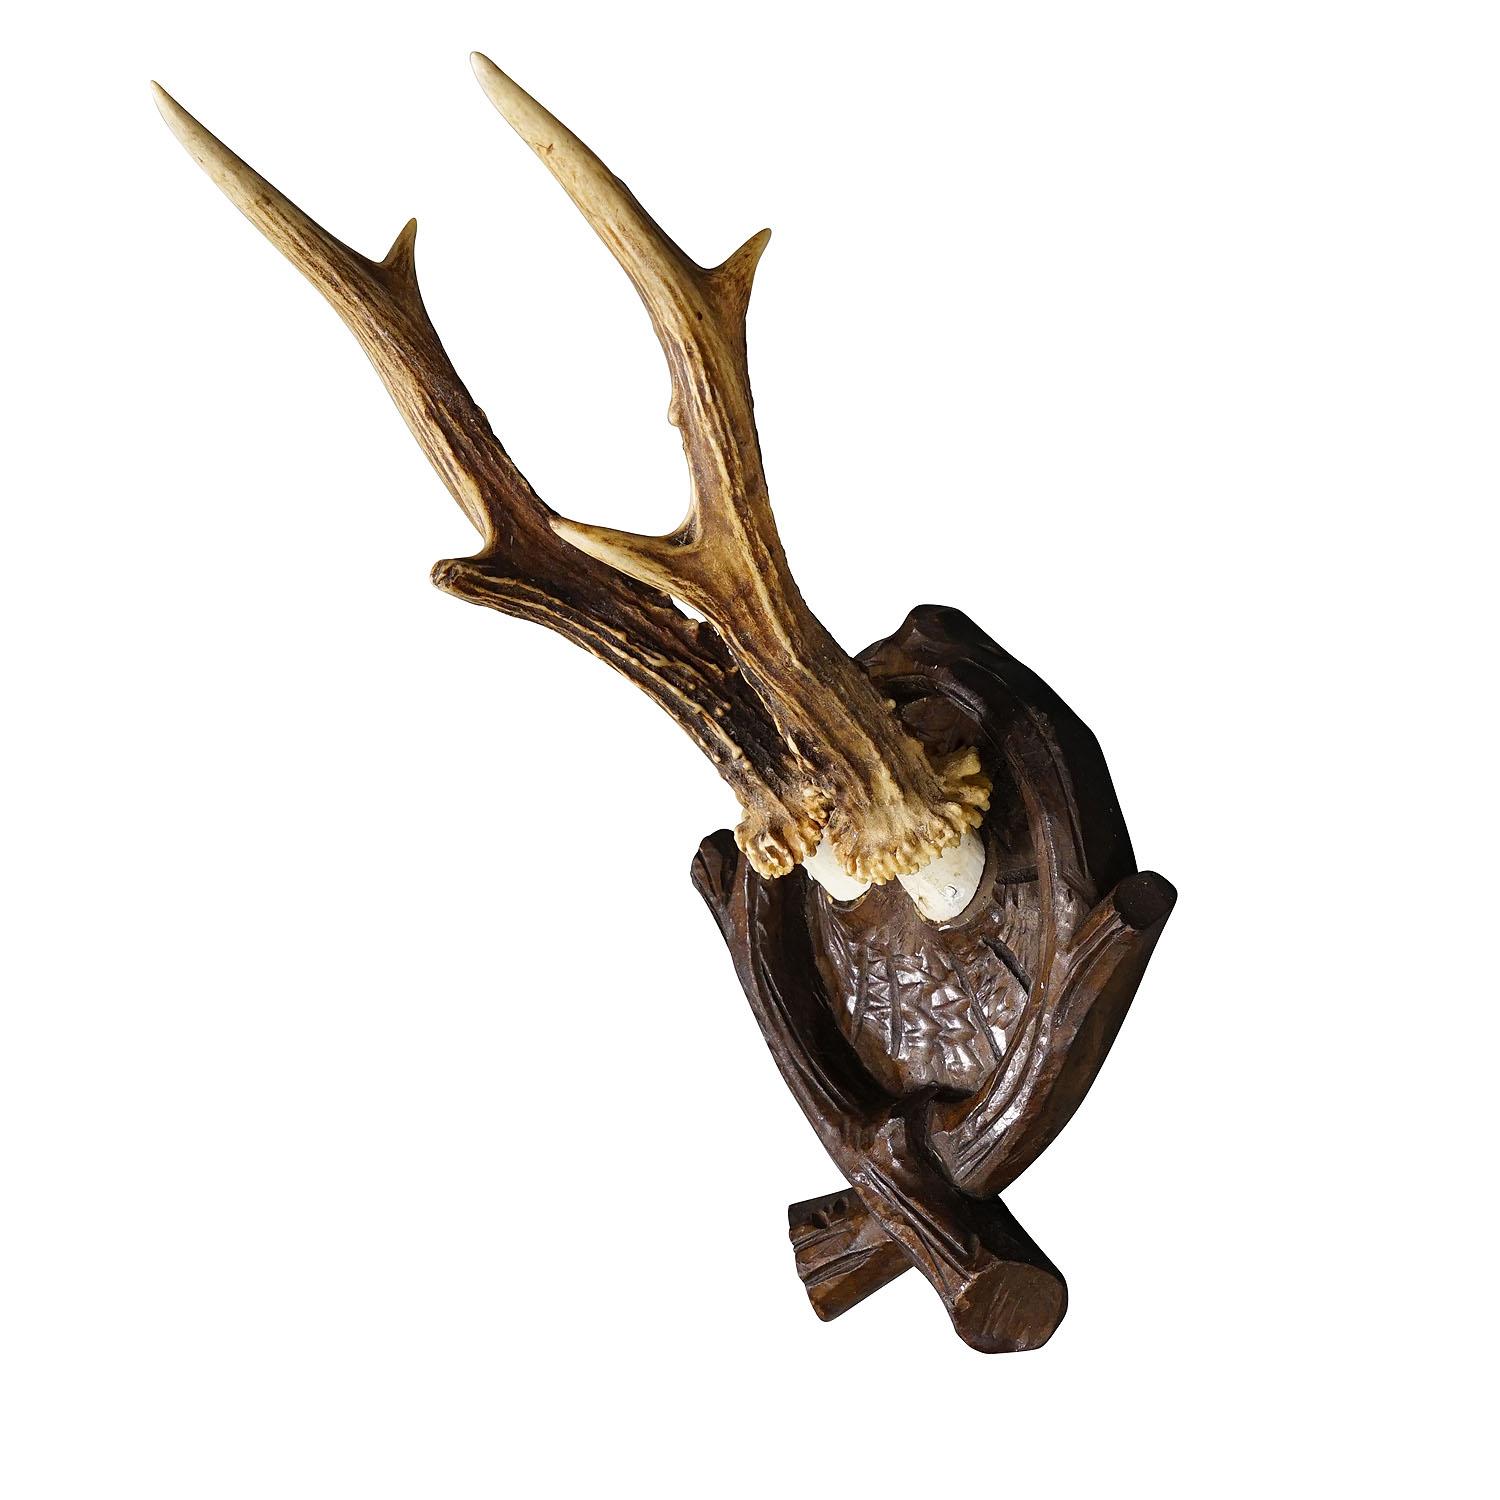 Antique Black Forest Roe Deer Trophy on Carved Plaque

A great antique roe deer (Capreolus capreolus) trophy on a wooden carved plaque. The trophy was shot around 1930. A great fit to your rustic cabin decoration.

Trophies are mementos from the